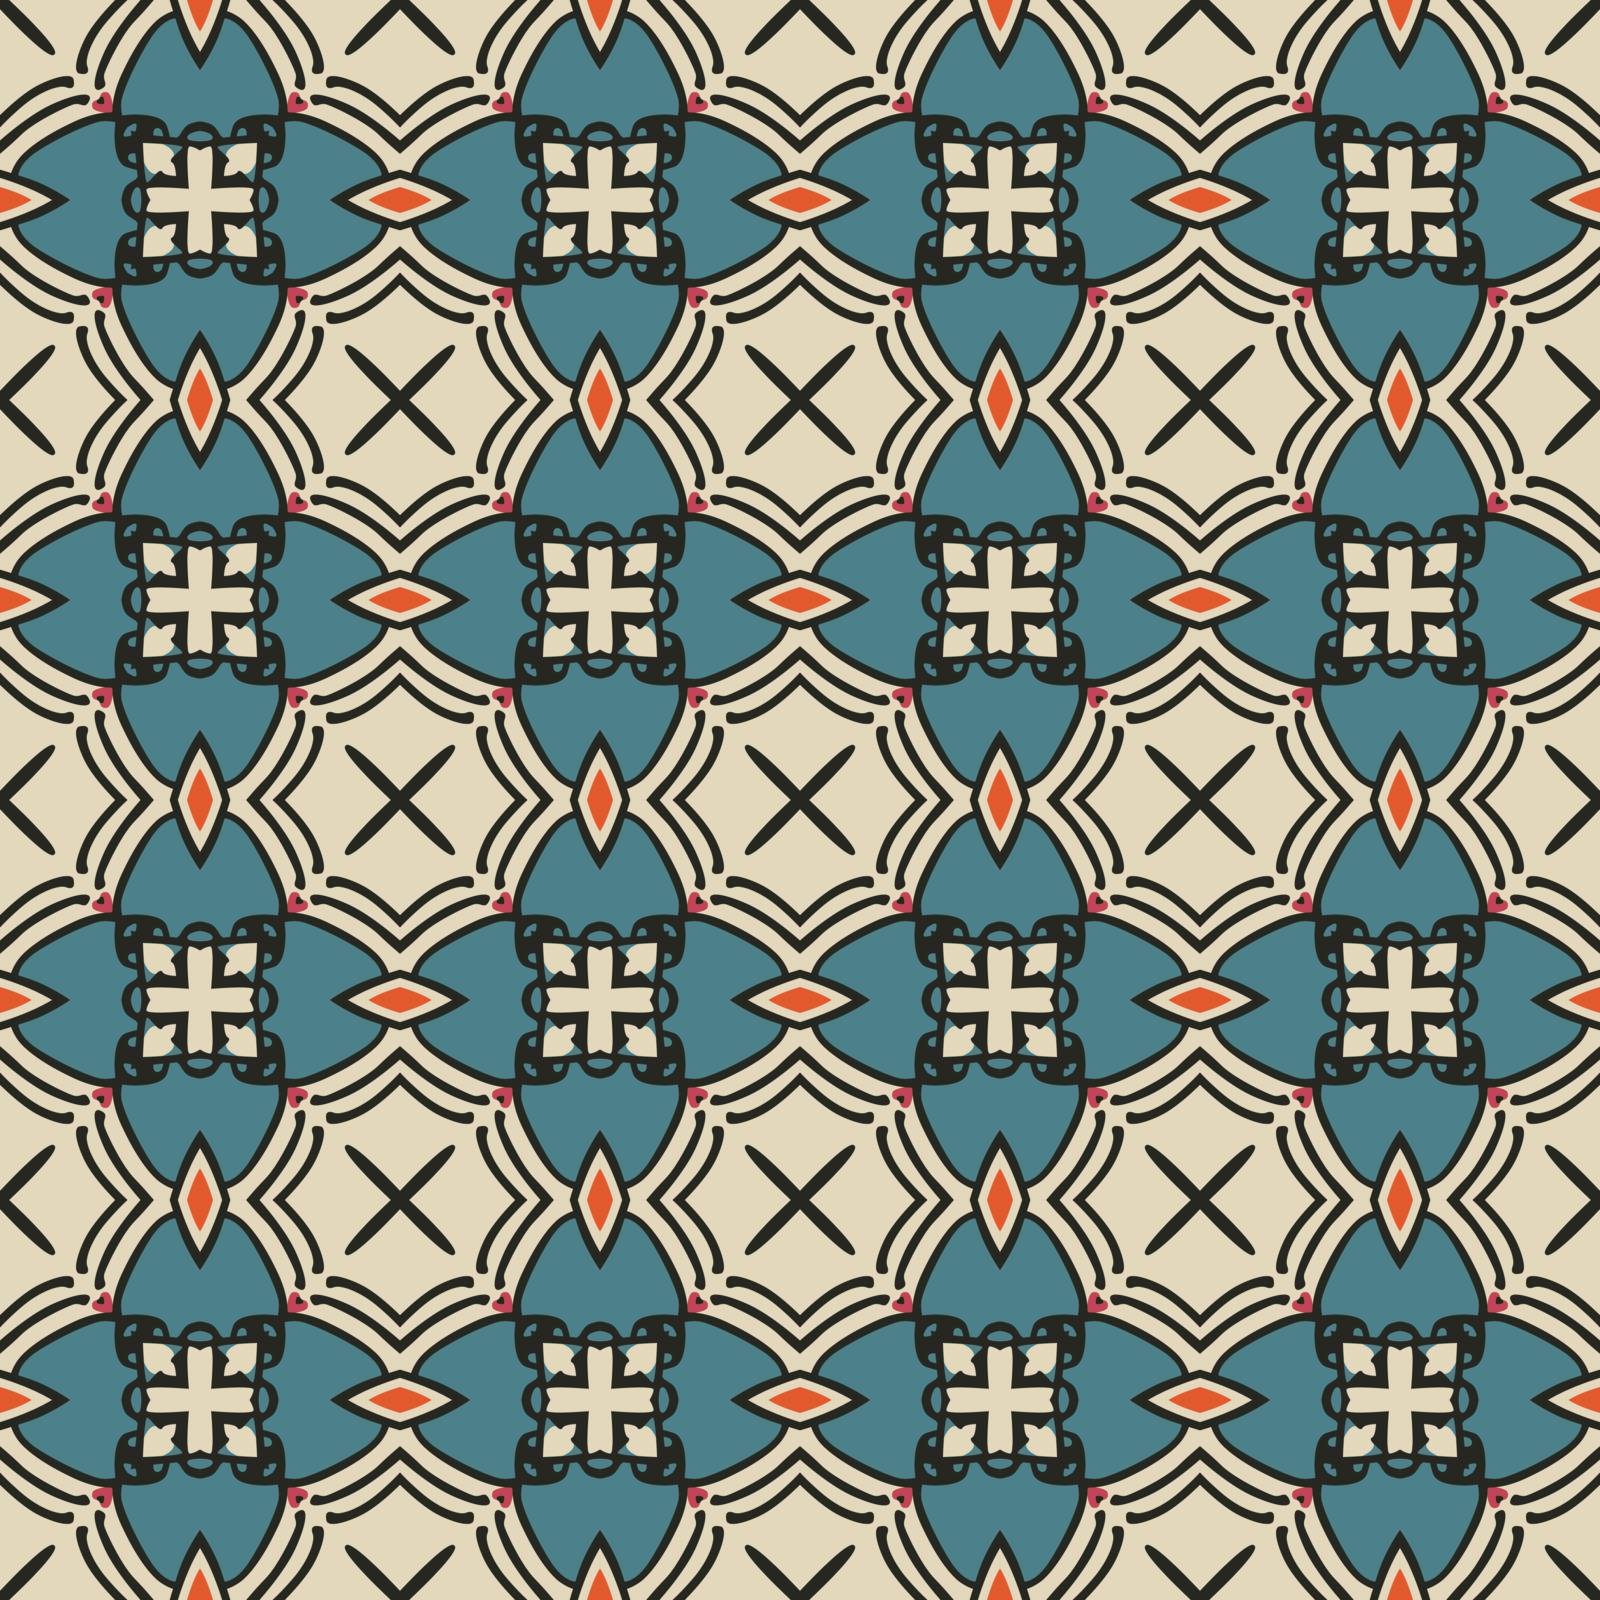 Seamless illustrated pattern made of abstract elements in beige,turquoise, orange and black